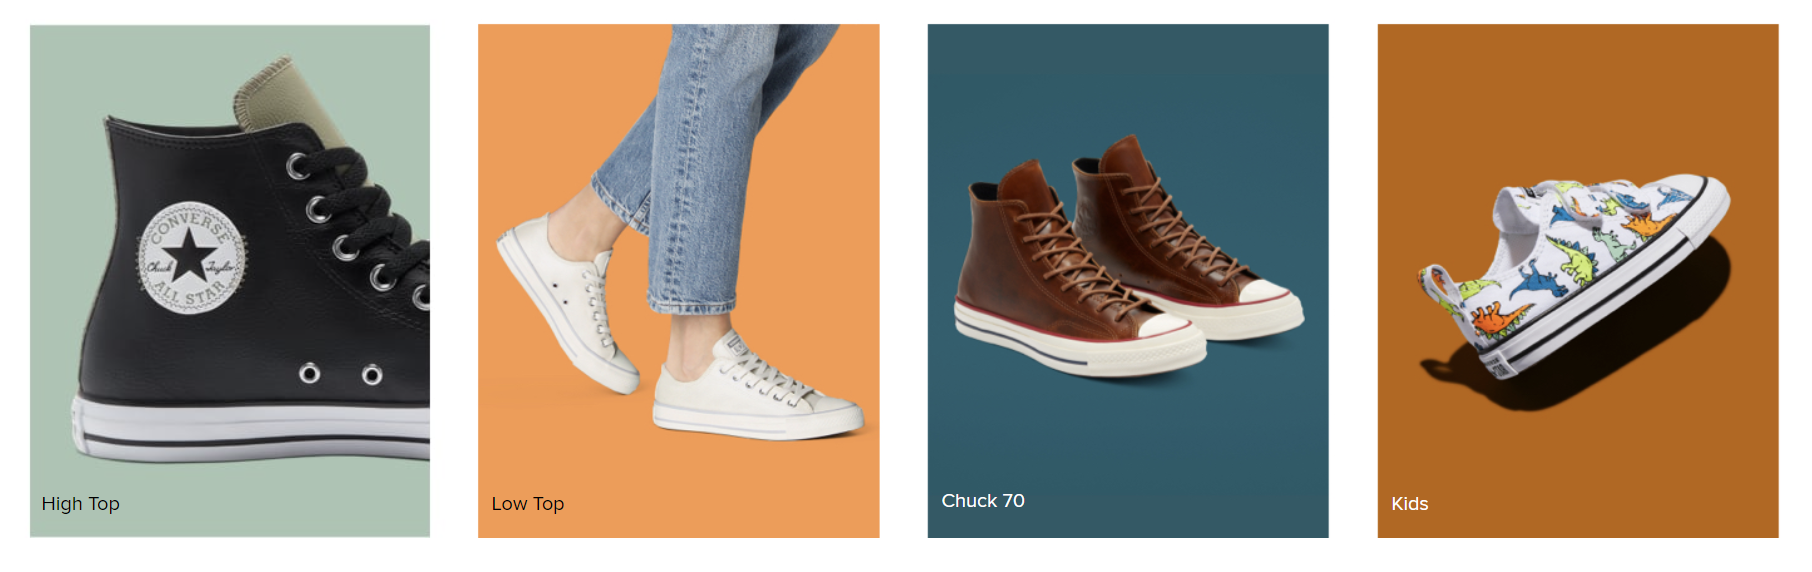 head over to converse and save 30% on shoes